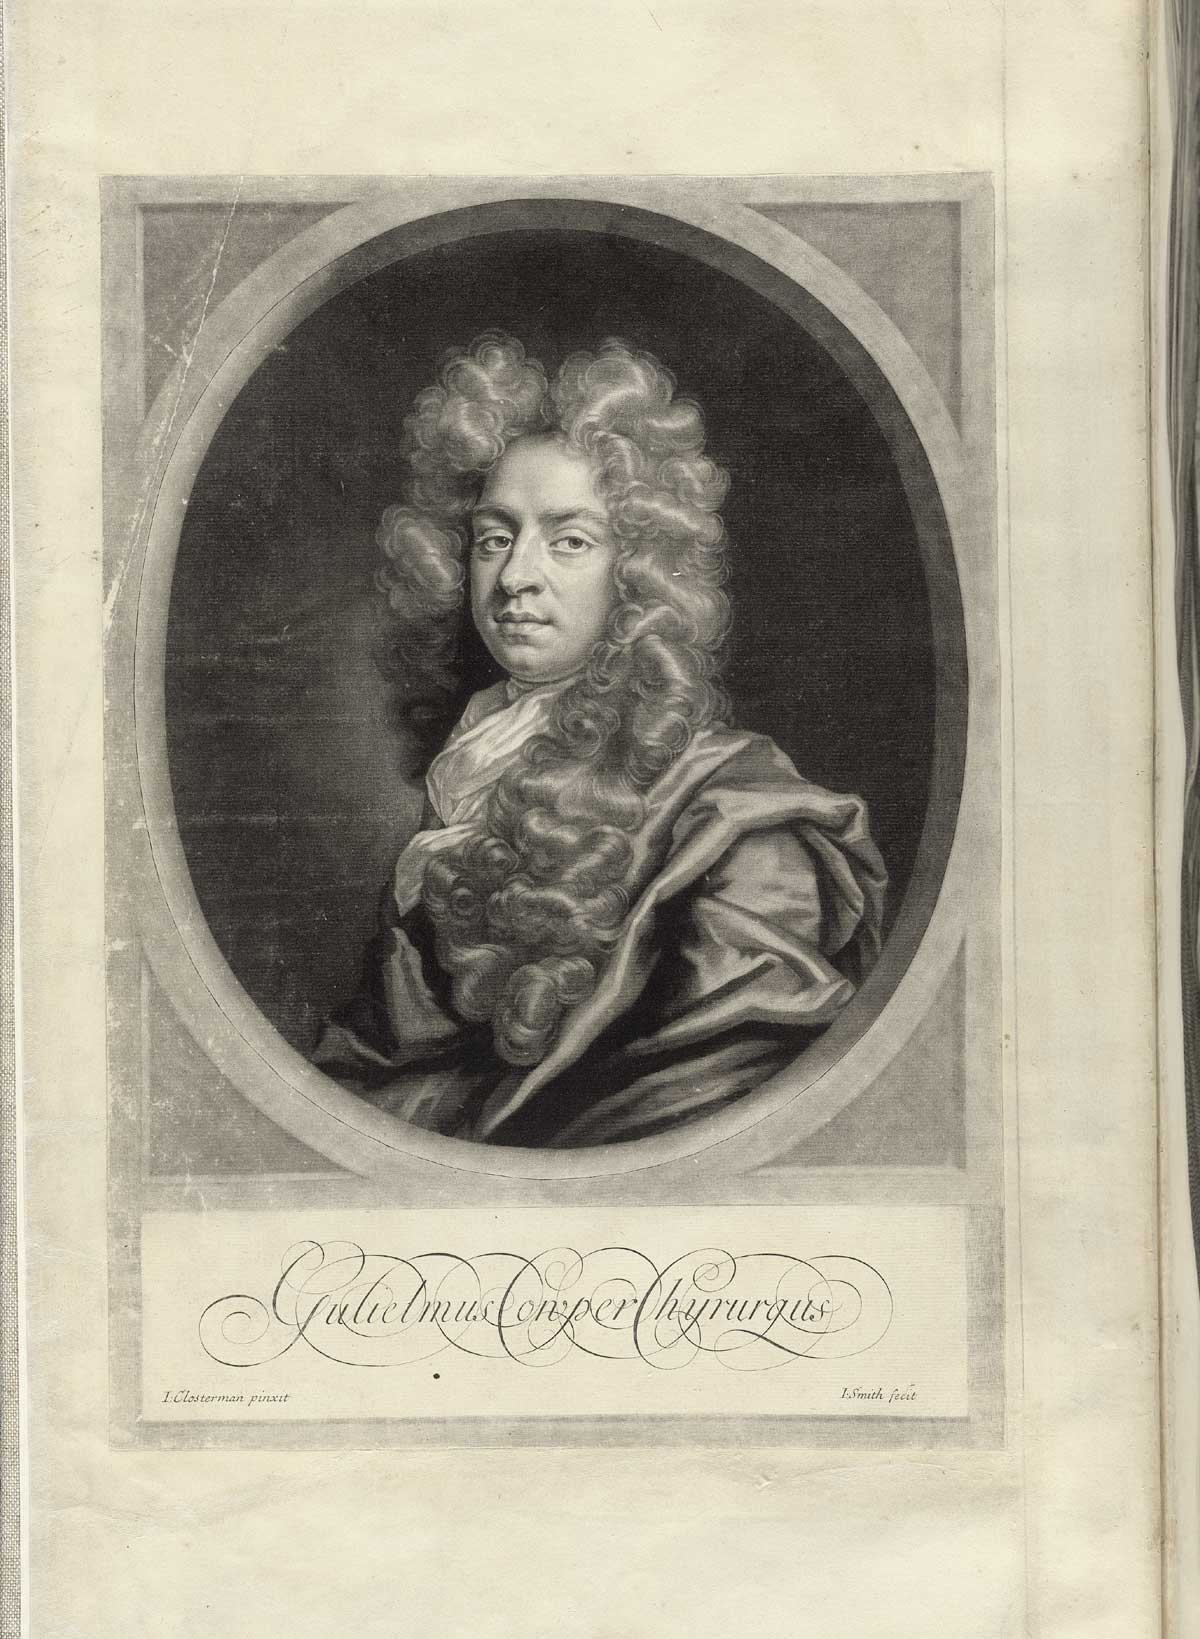 Engraved portrait of William Cowper from the original painting by John Closterman, engraved in mezzotint by John Smith; Cowper is shown wearing a large wig typical of the late 17th century with flowing robes, with his name engraved beneath, from his Anatomy of the humane bodies, NLM Call no.: WZ 250 C876a 1698.